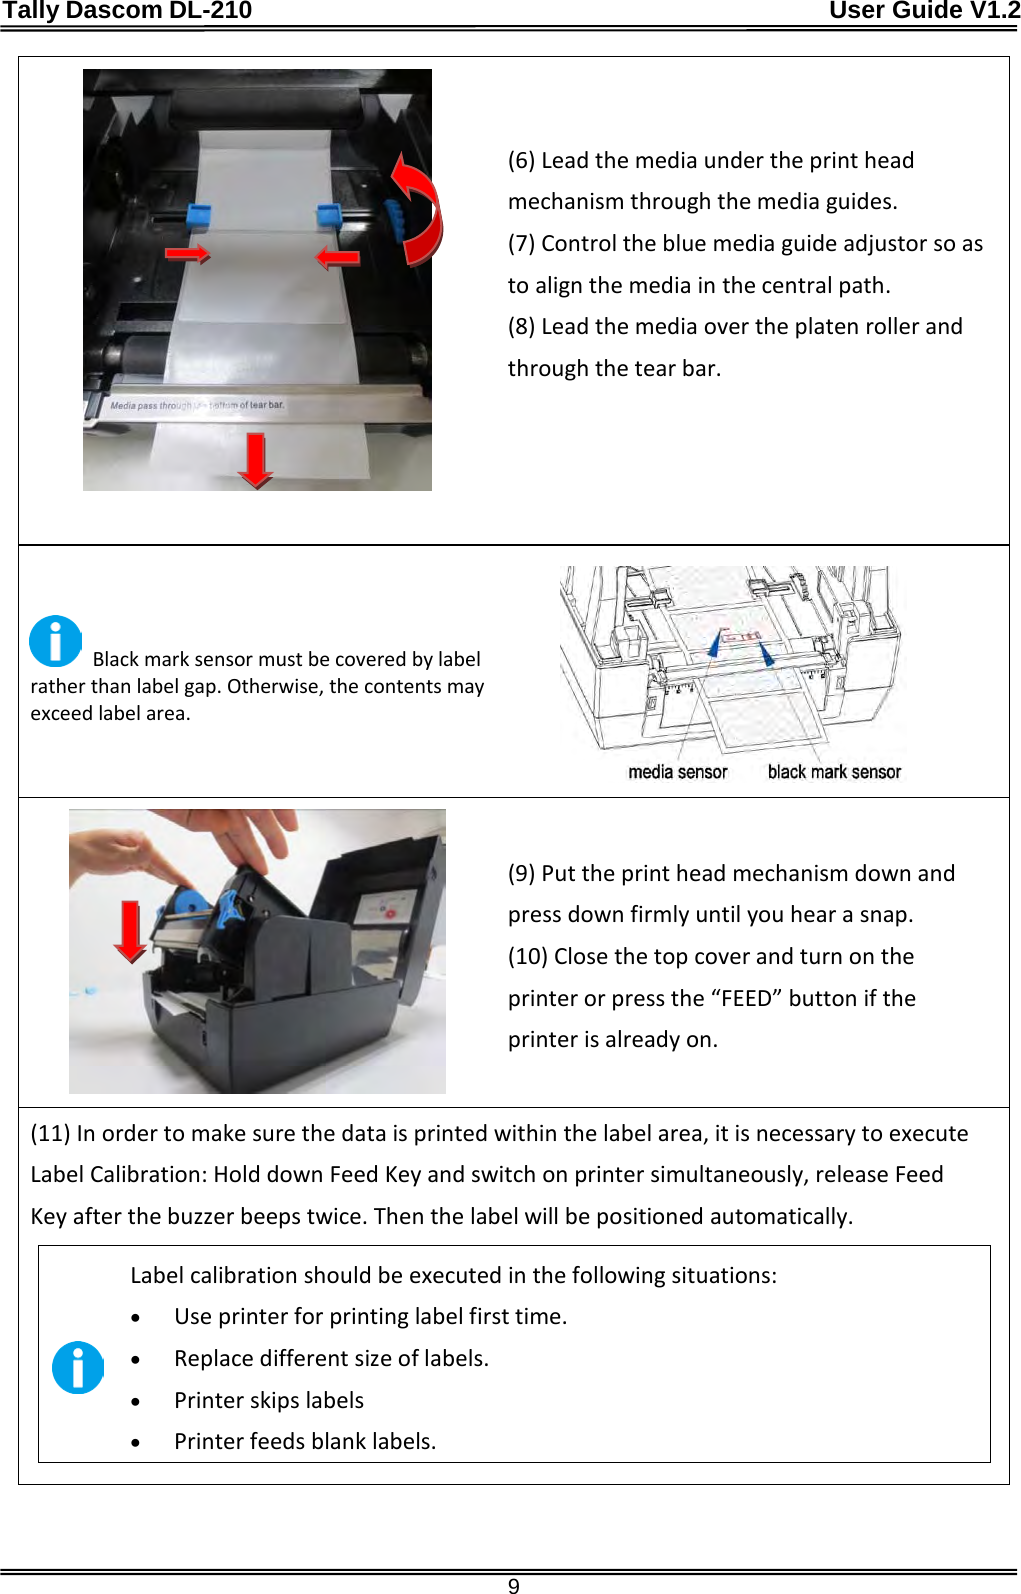 Tally Dascom DL-210                                              User Guide V1.2  9  (6) Lead the media under the print head mechanism through the media guides.   (7) Control the blue media guide adjustor so as to align the media in the central path. (8) Lead the media over the platen roller and through the tear bar.      Black mark sensor must be covered by label     rather than label gap. Otherwise, the contents may exceed label area.   (9) Put the print head mechanism down and press down firmly until you hear a snap. (10) Close the top cover and turn on the printer or press the “FEED” button if the printer is already on. (11) In order to make sure the data is printed within the label area, it is necessary to execute Label Calibration: Hold down Feed Key and switch on printer simultaneously, release Feed Key after the buzzer beeps twice. Then the label will be positioned automatically.   Label calibration should be executed in the following situations: • Use printer for printing label first time. • Replace different size of labels. • Printer skips labels • Printer feeds blank labels.     